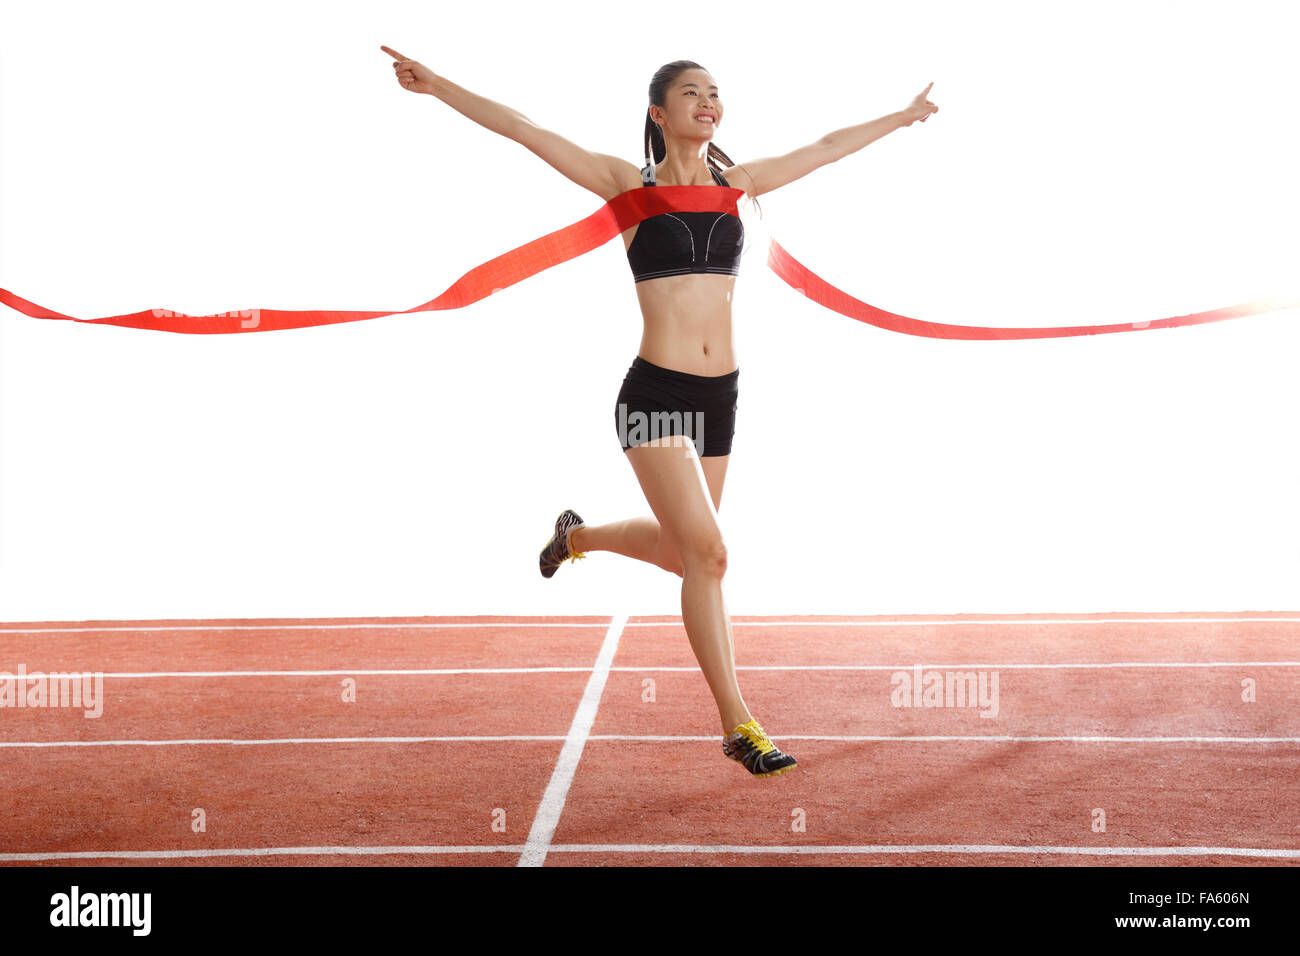 Athlete finishing line run Cut Out Stock Images & Pictures - Alamy